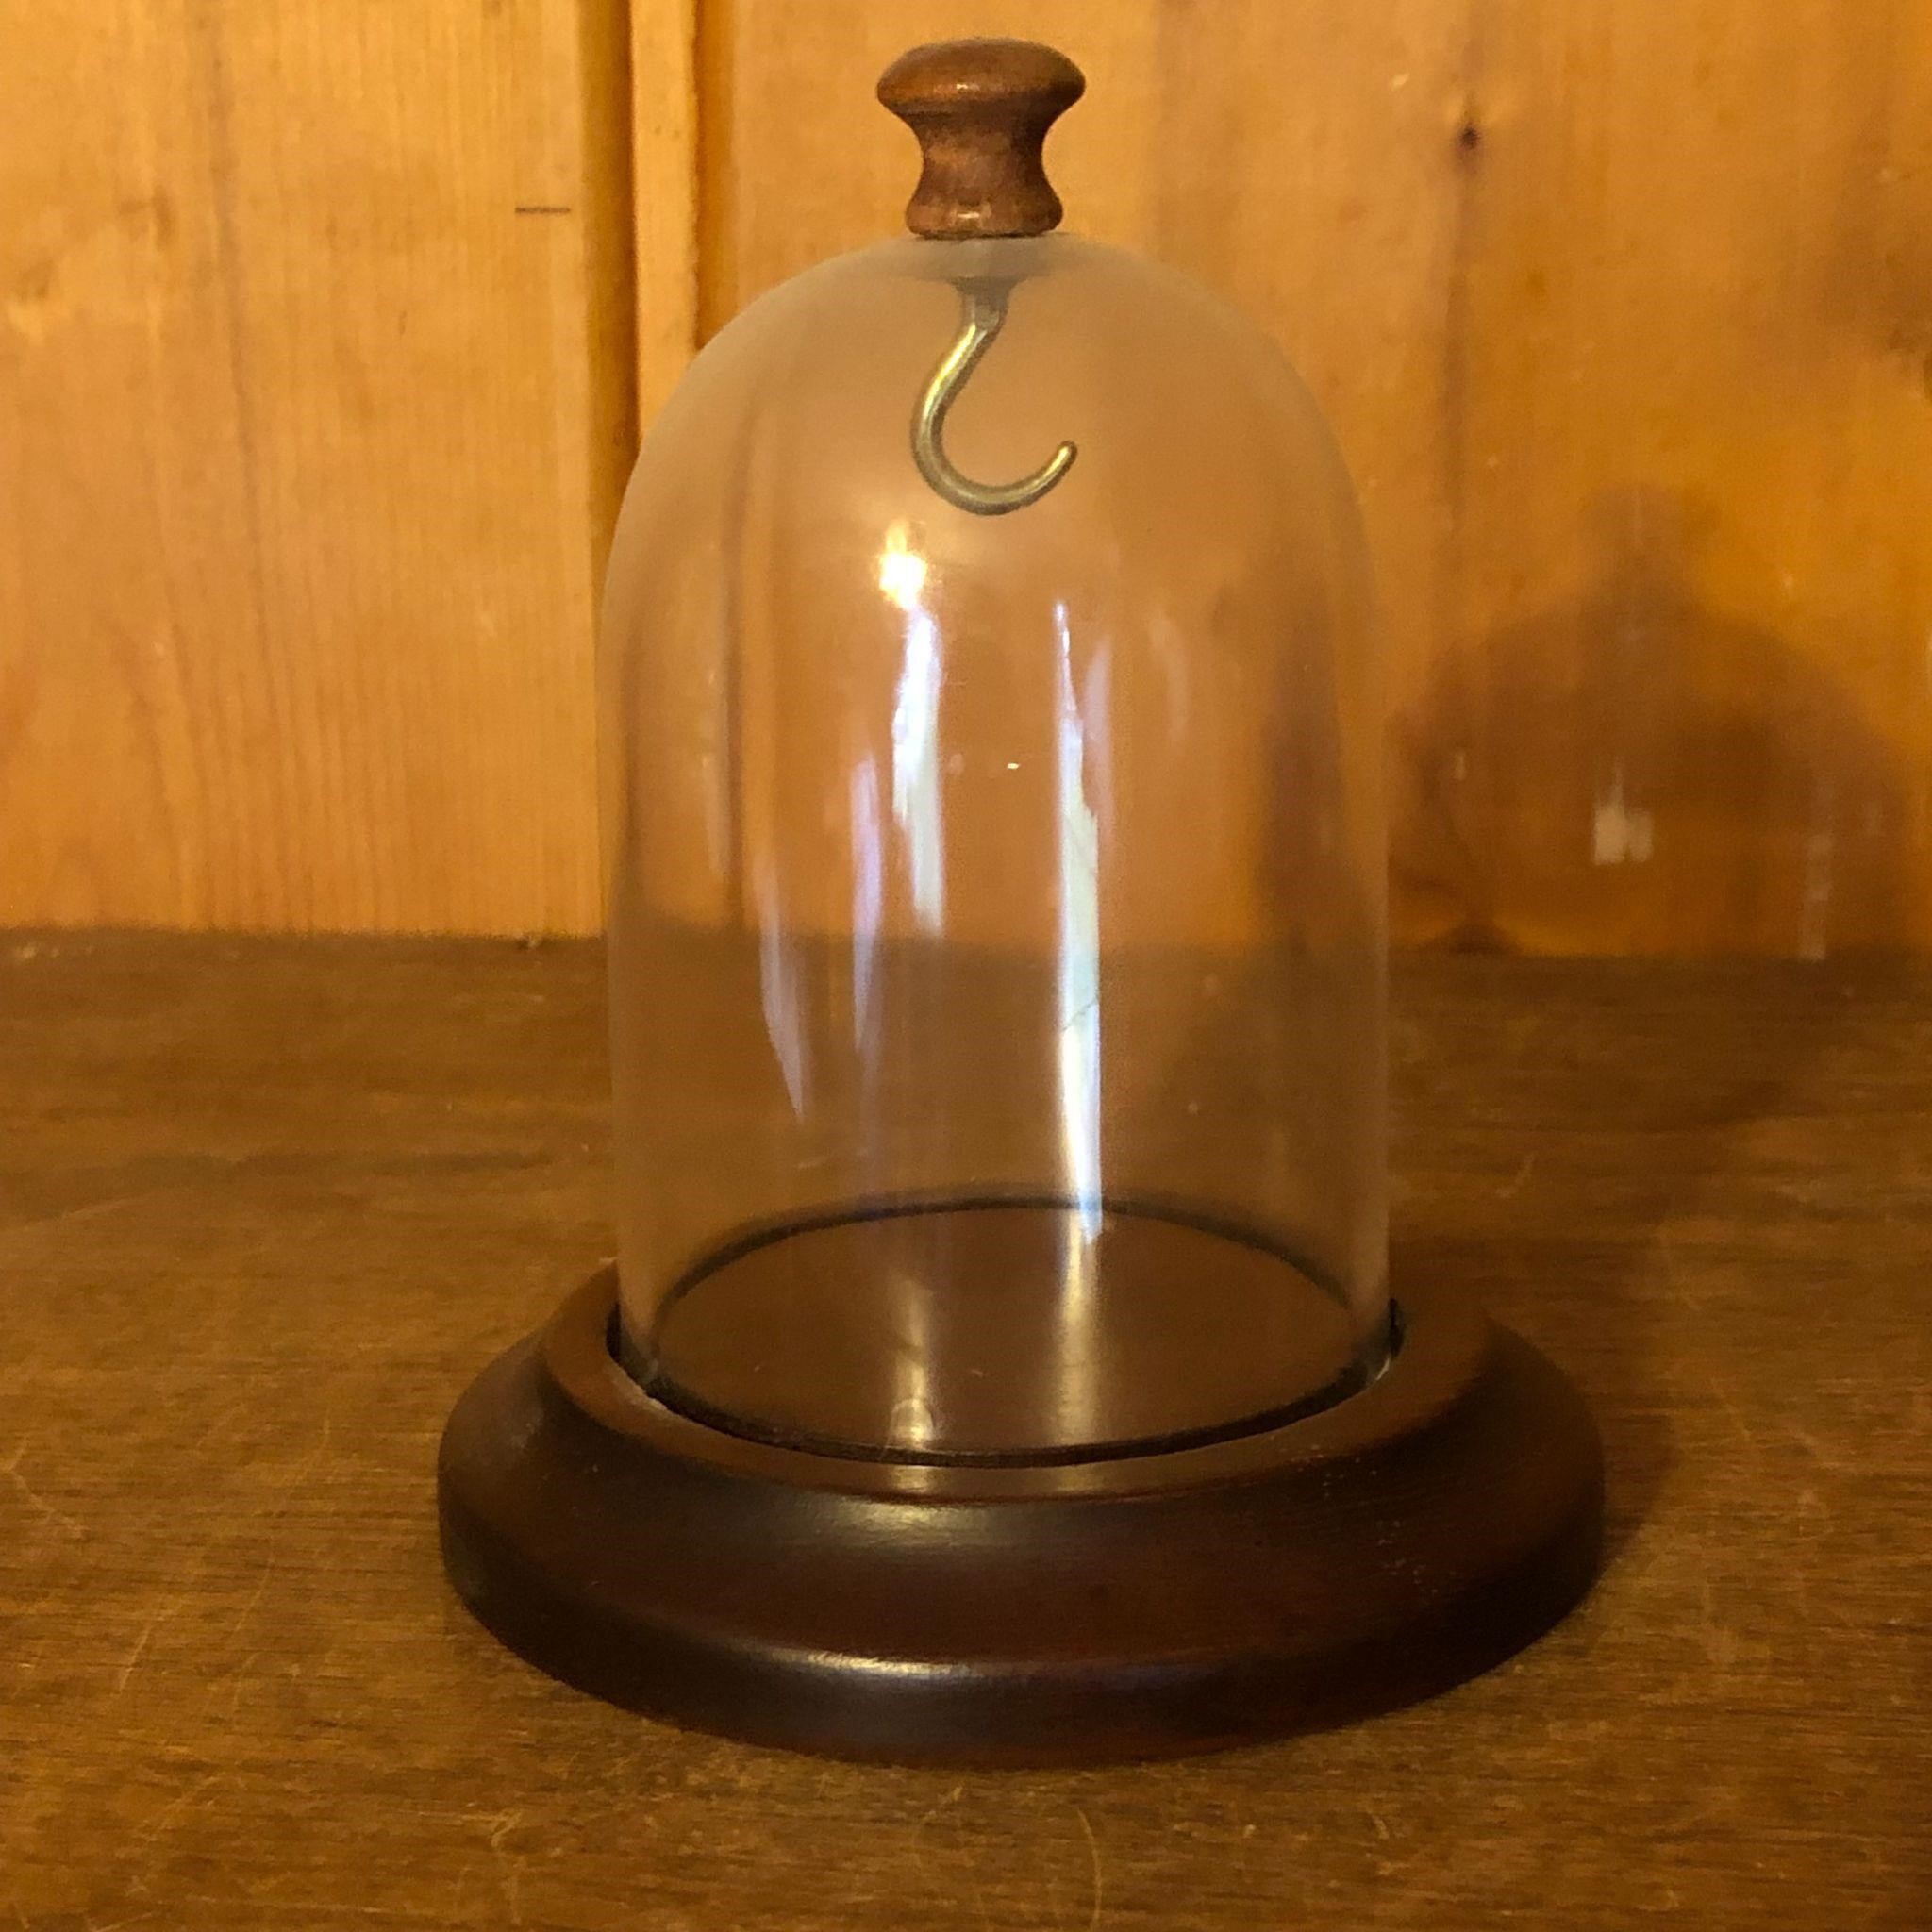 Wood & Domed Glass Pocket Watch Display Case